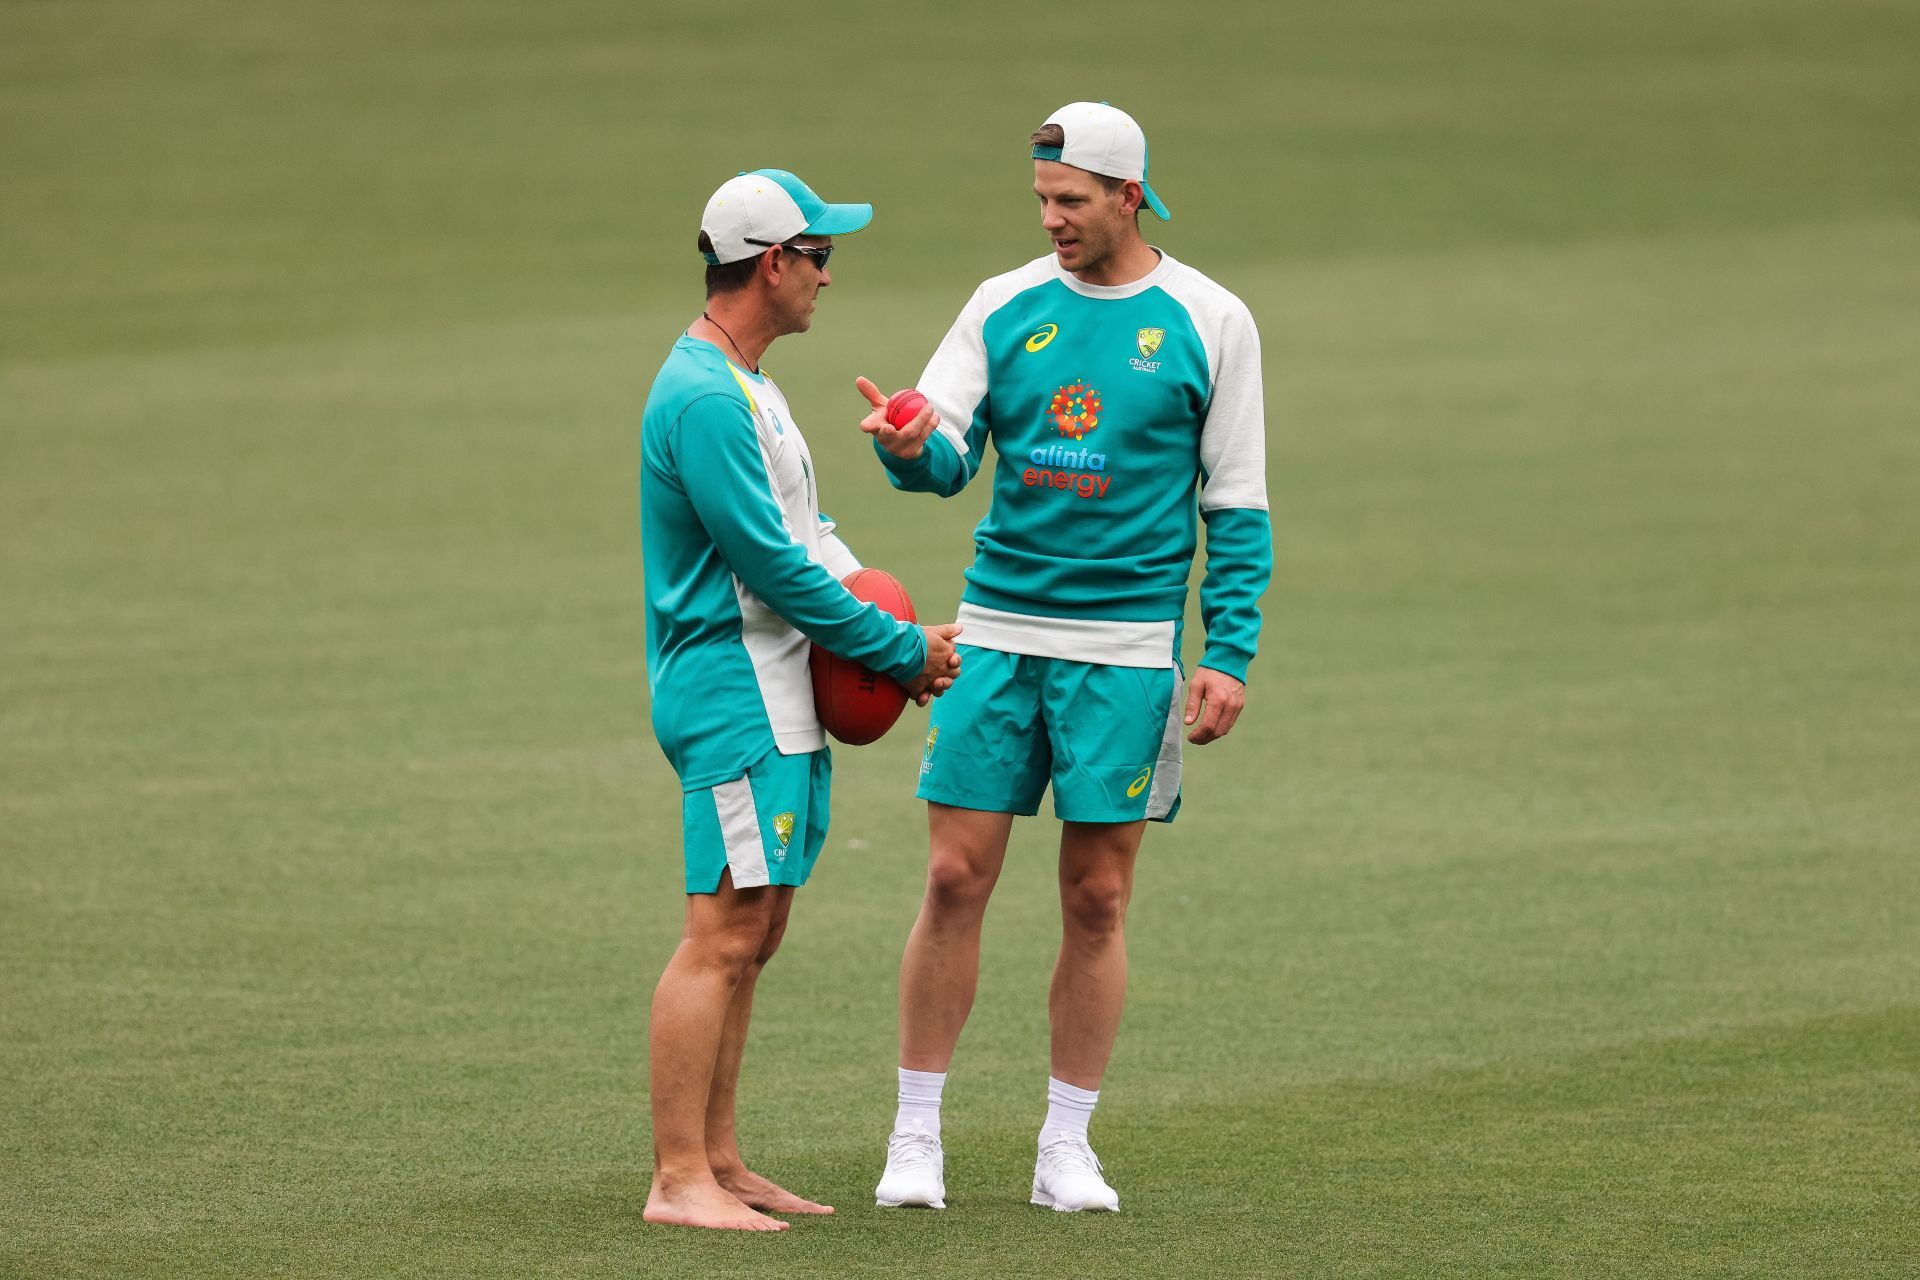 Justin Langer and Tim Paine. (Image Credits: Getty)